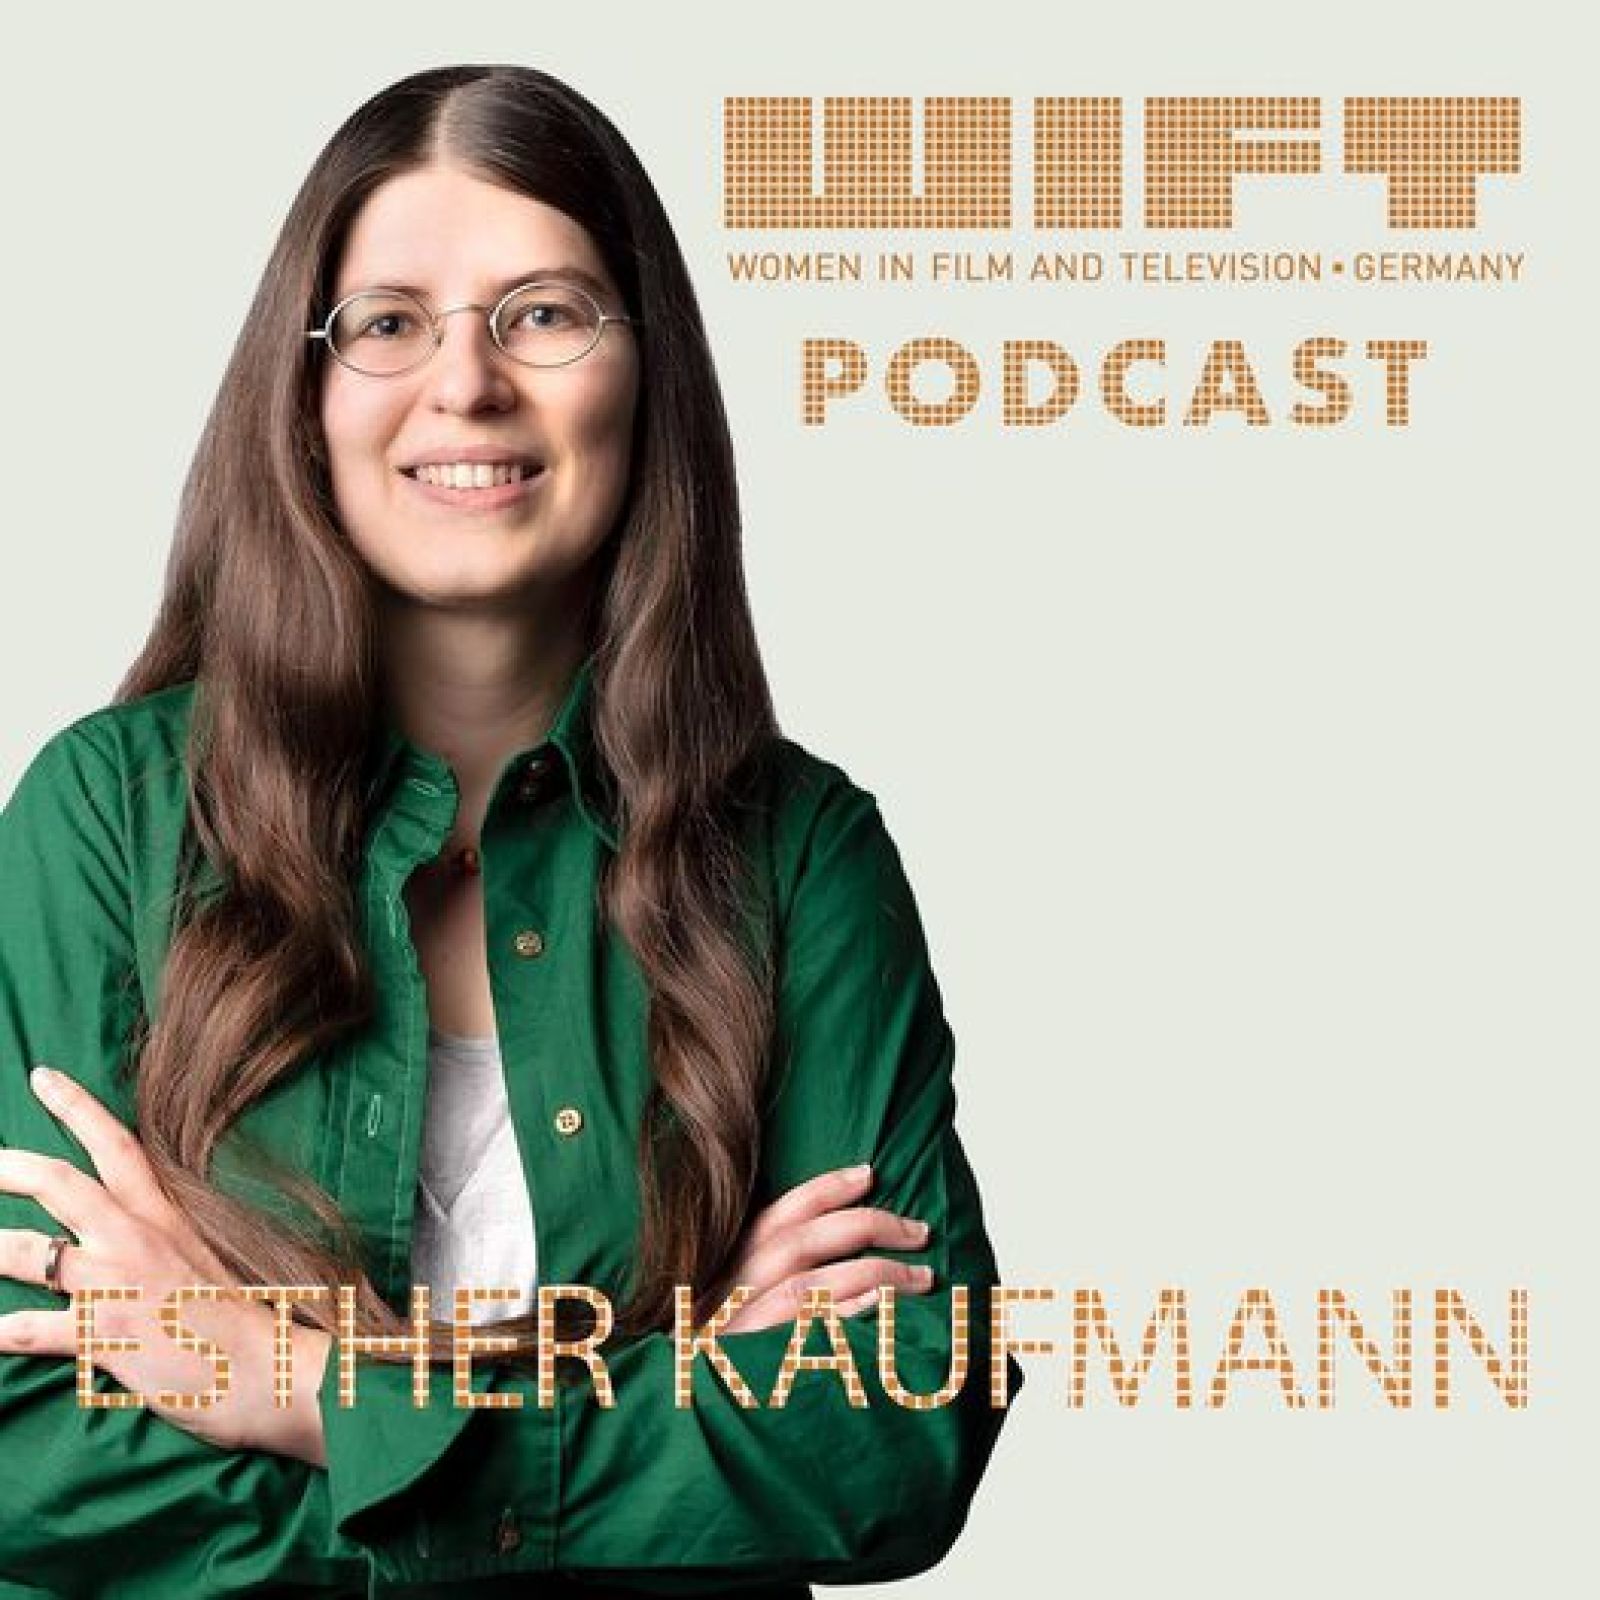 Esther-Kaufmann-Wift-Women-in-Film-and-Television-Kim-Seidler-Podcast